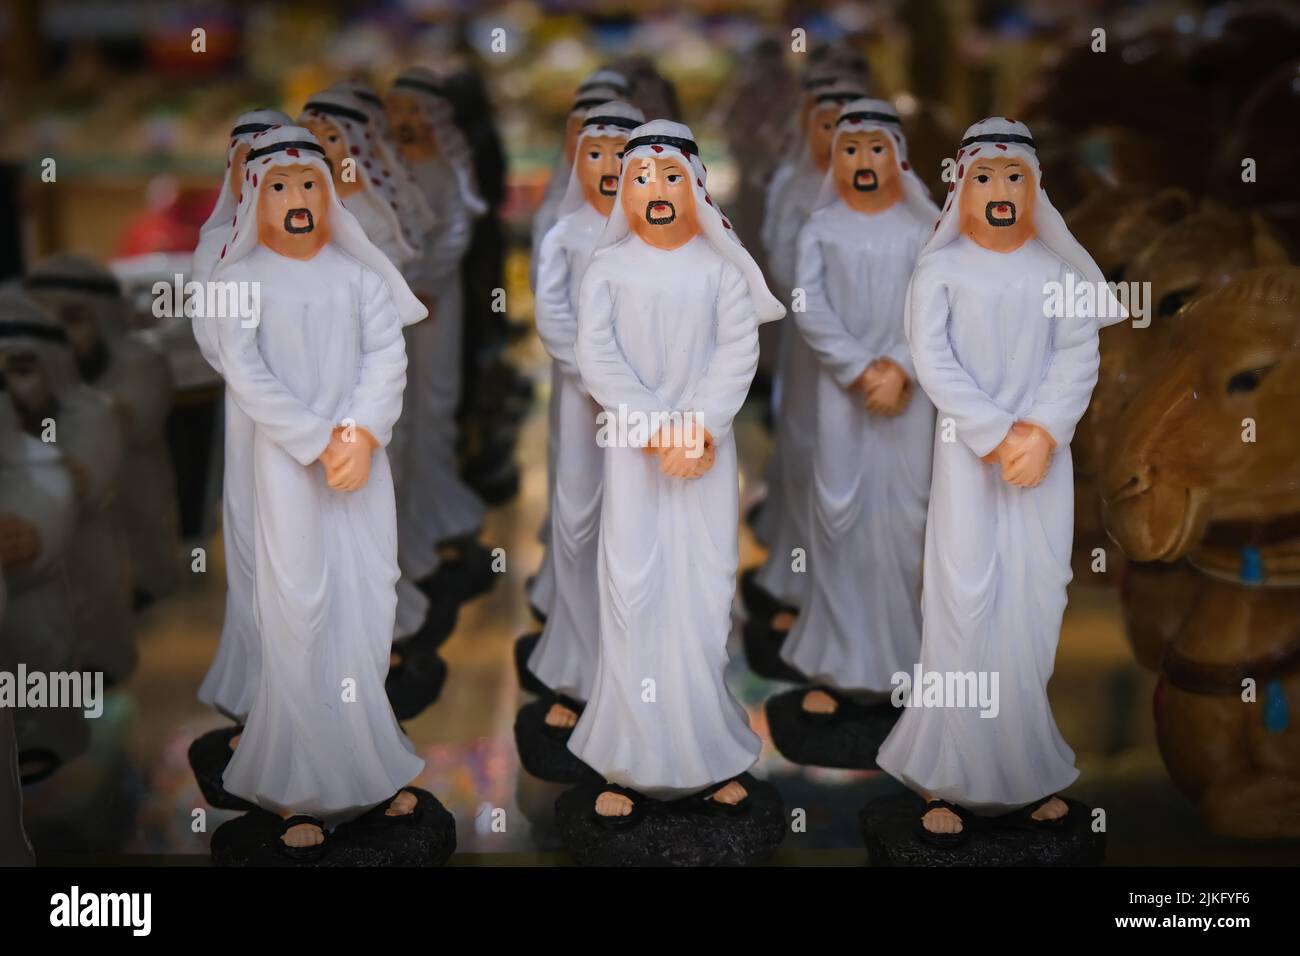 Arabian men figurines wearing traditional national clothes as souvenir or gift from Gulf Middle East countries Stock Photo